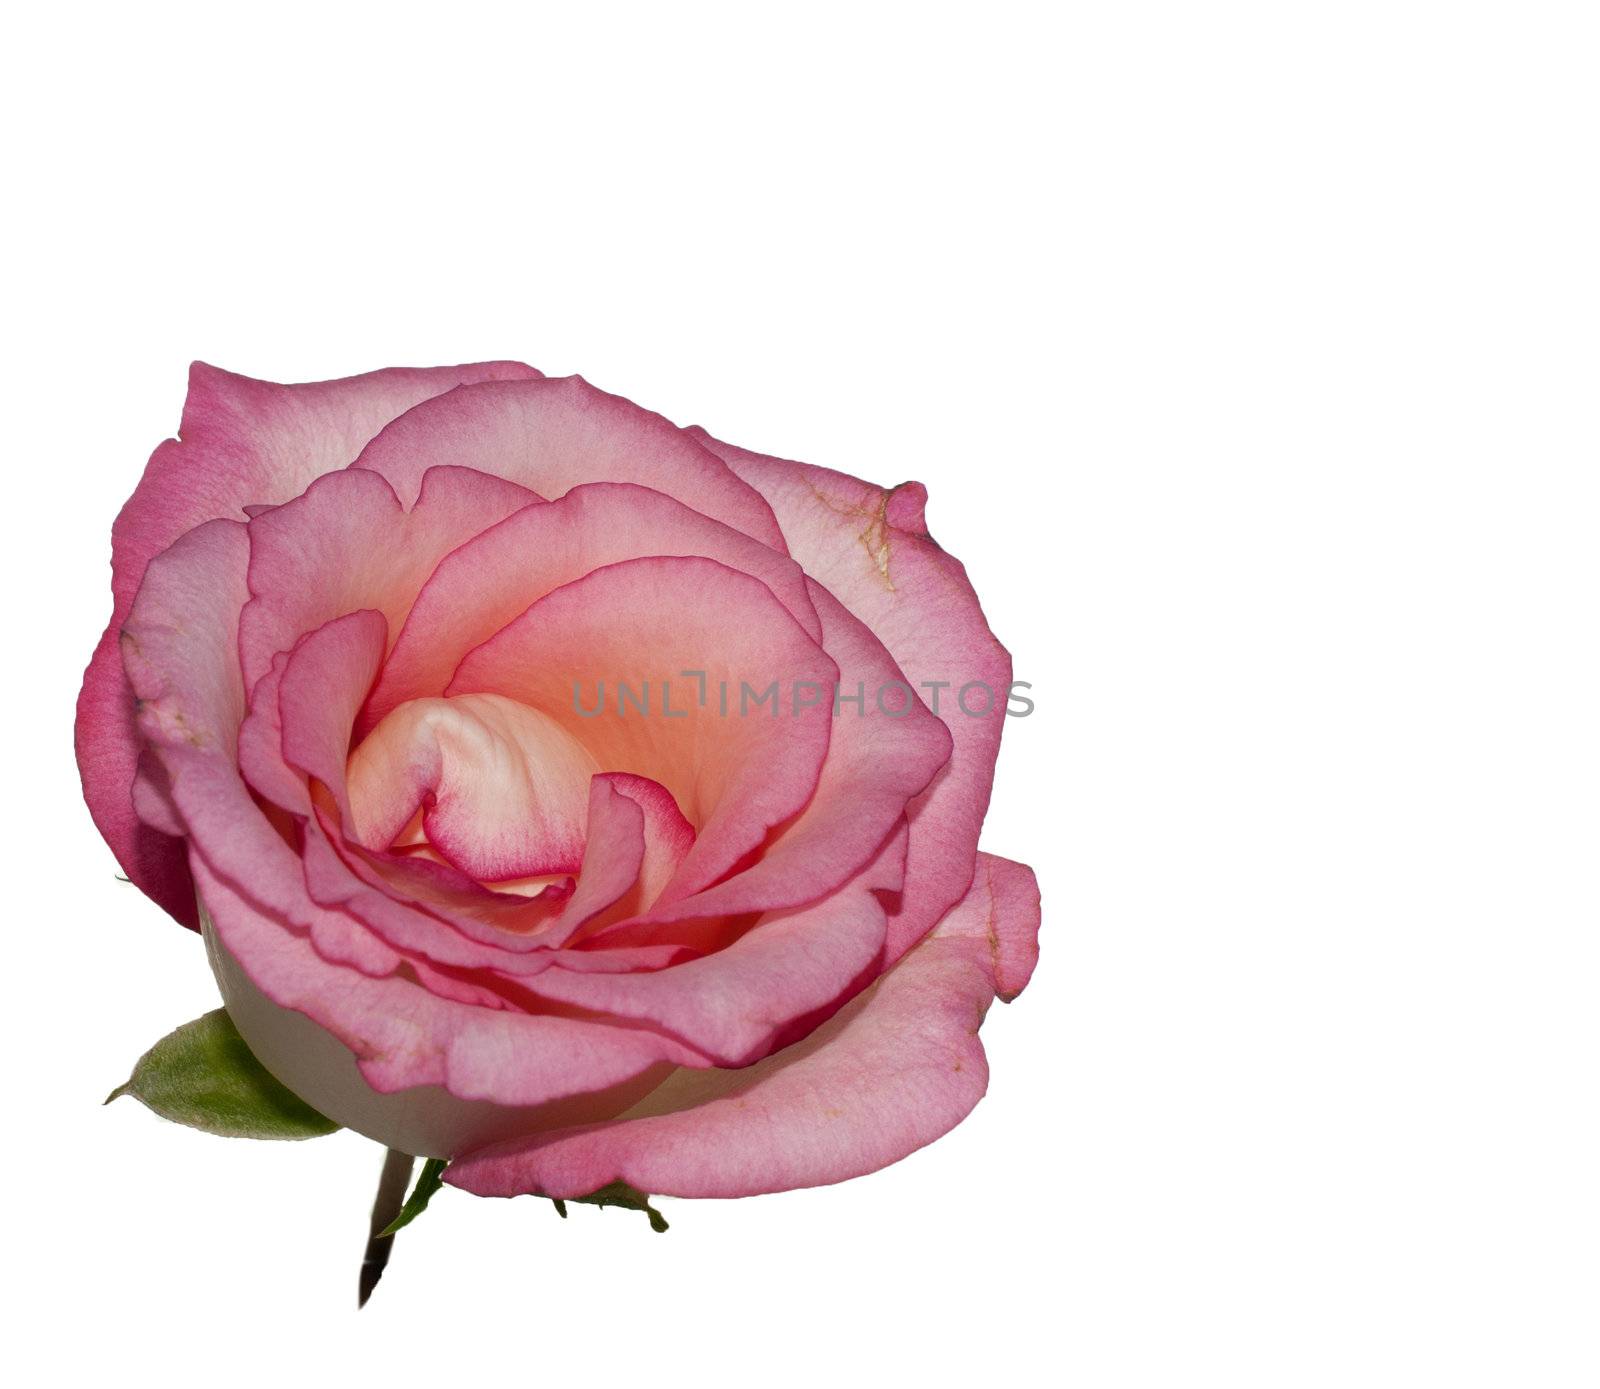 isolated pink rose by compuinfoto